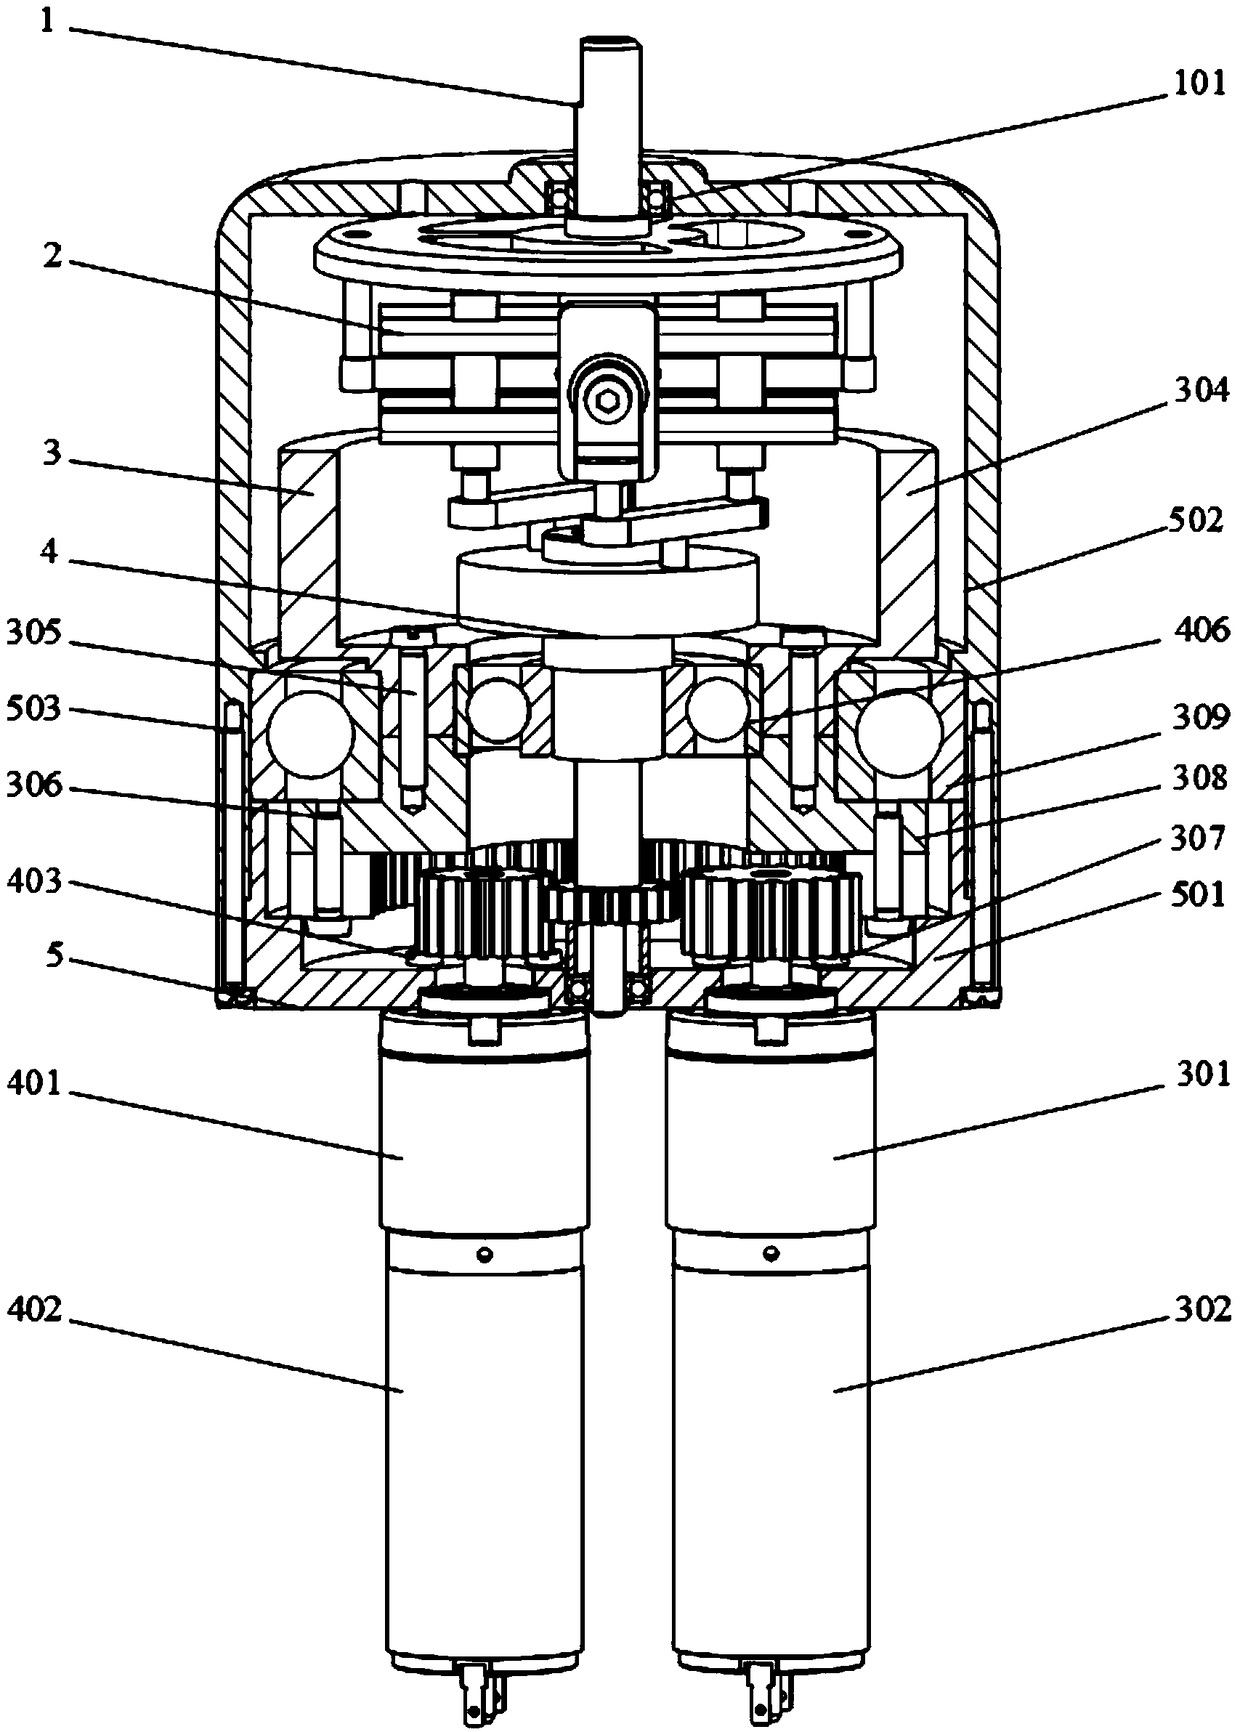 Rotation joint variable rigidity actuator